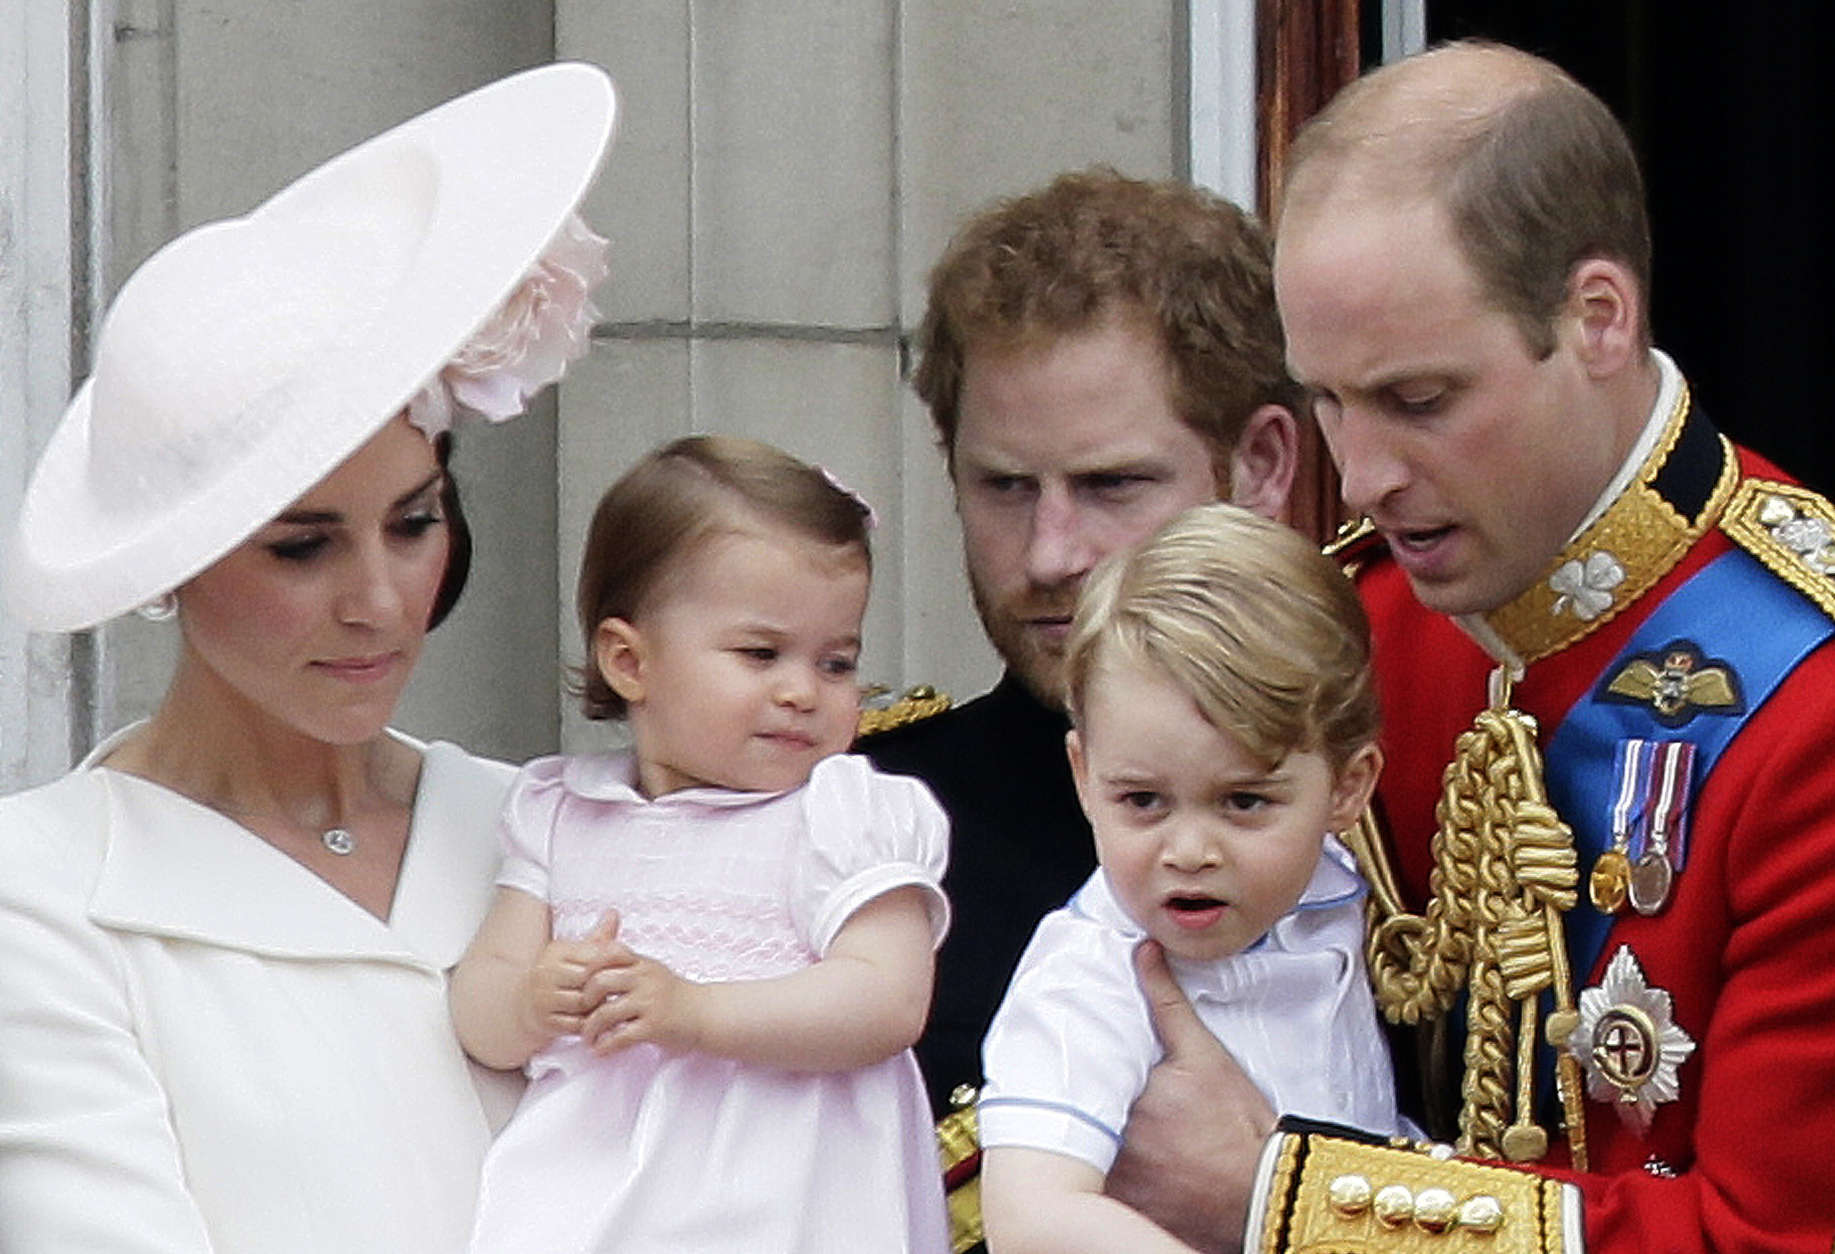 Britain's Prince William holding Prince George, right and Kate, Duchess of Cambridge holding Princess Charlotte, left, on the balcony during the Trooping The Colour parade at Buckingham Palace, in London. (AP Photo/Tim Ireland, File)